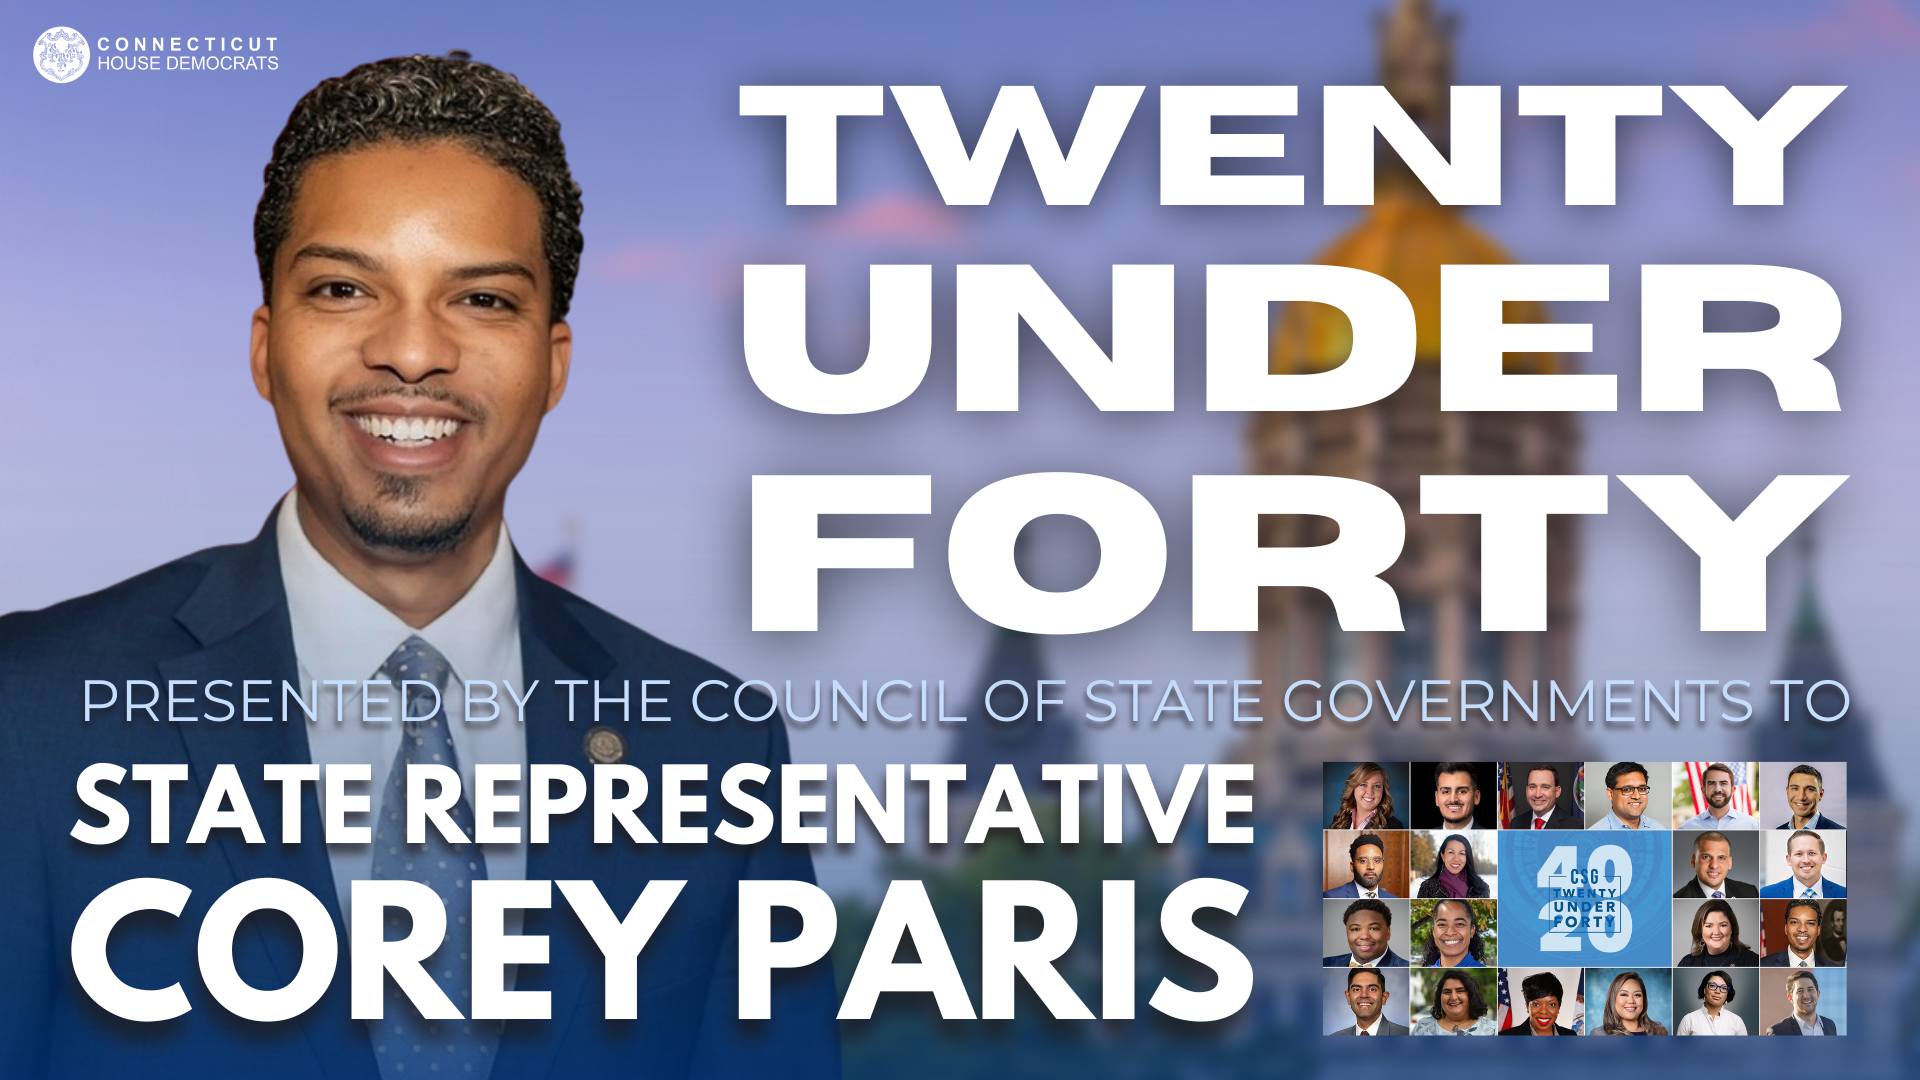 Representative Paris will receive the Council of State Government's "20 Under 40 Leadership Award in December in North Carolina.